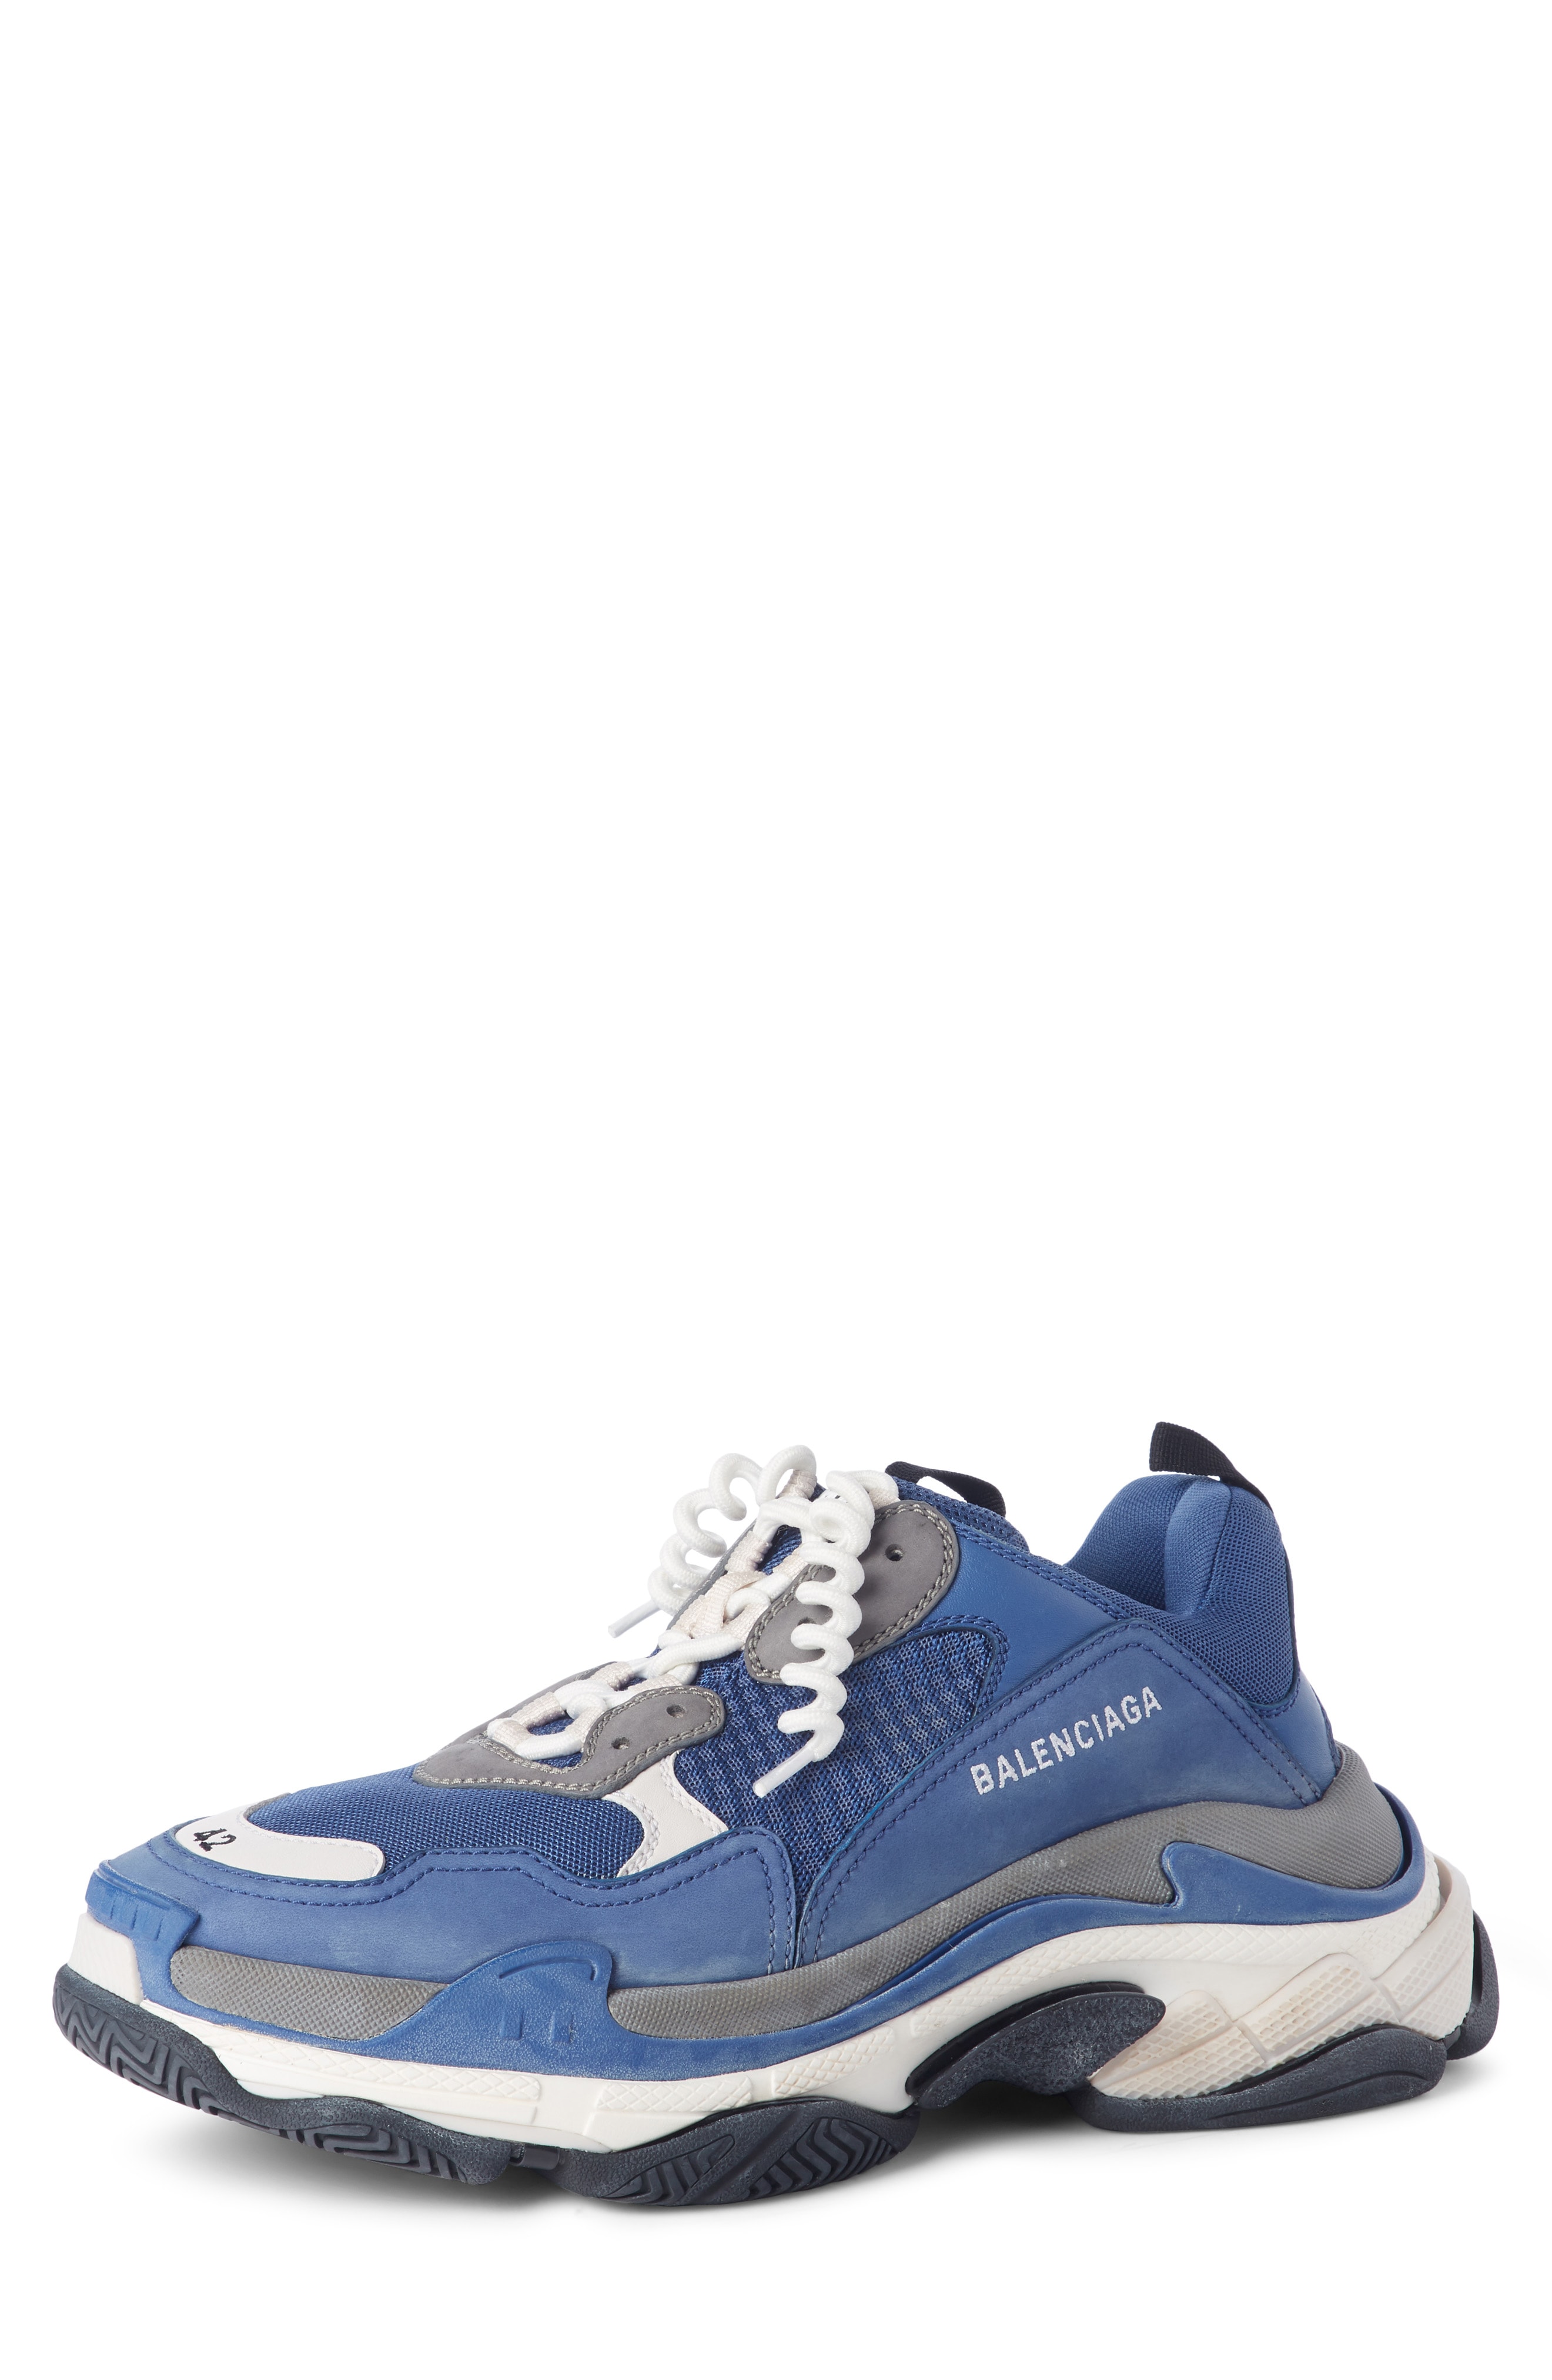 Men's Blue Sneakers, Athletic & Running Shoes | Nordstrom